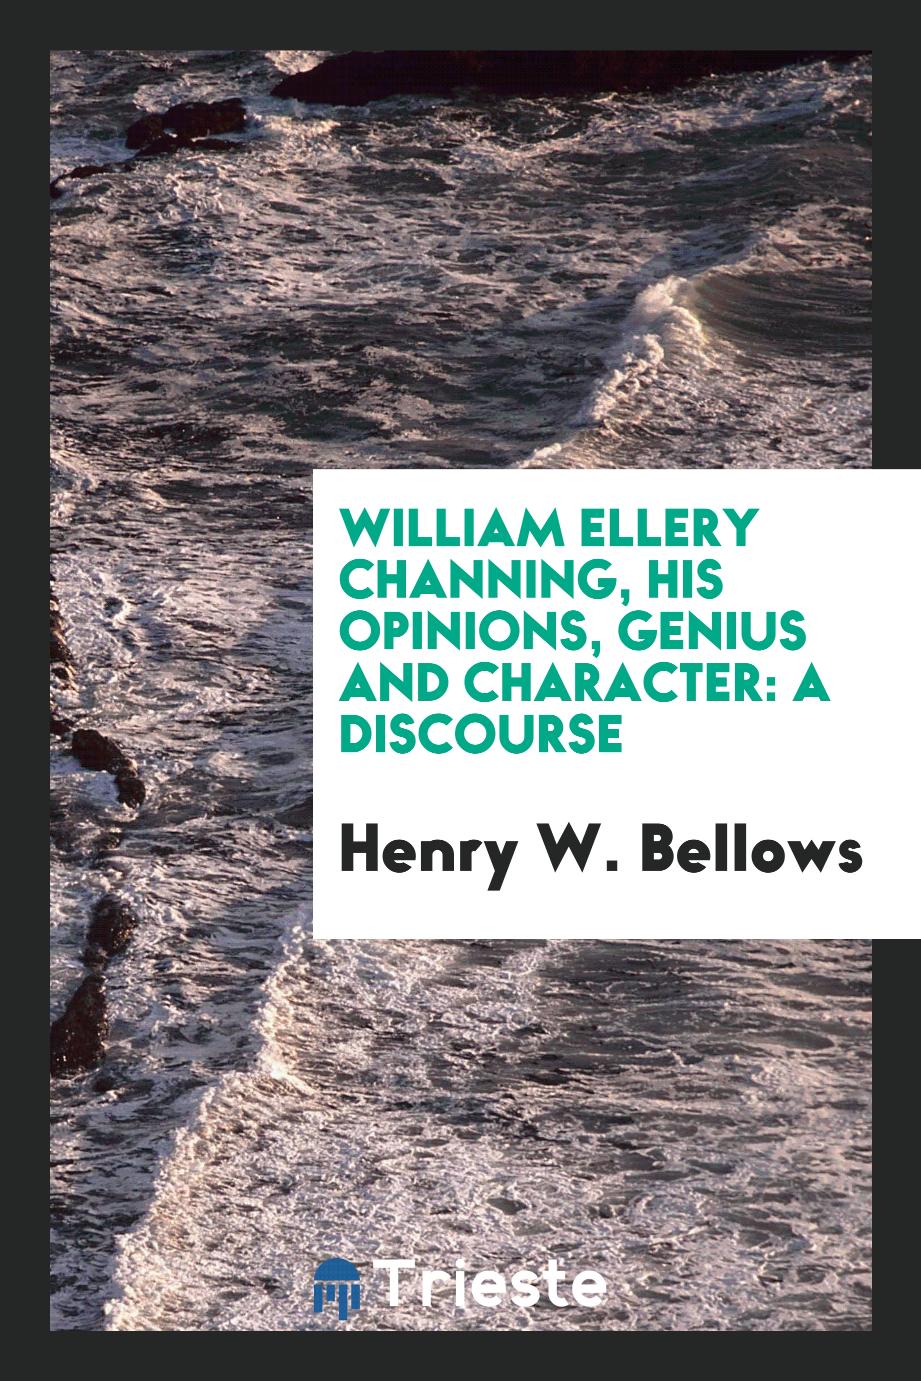 William Ellery Channing, his opinions, genius and character: a discourse